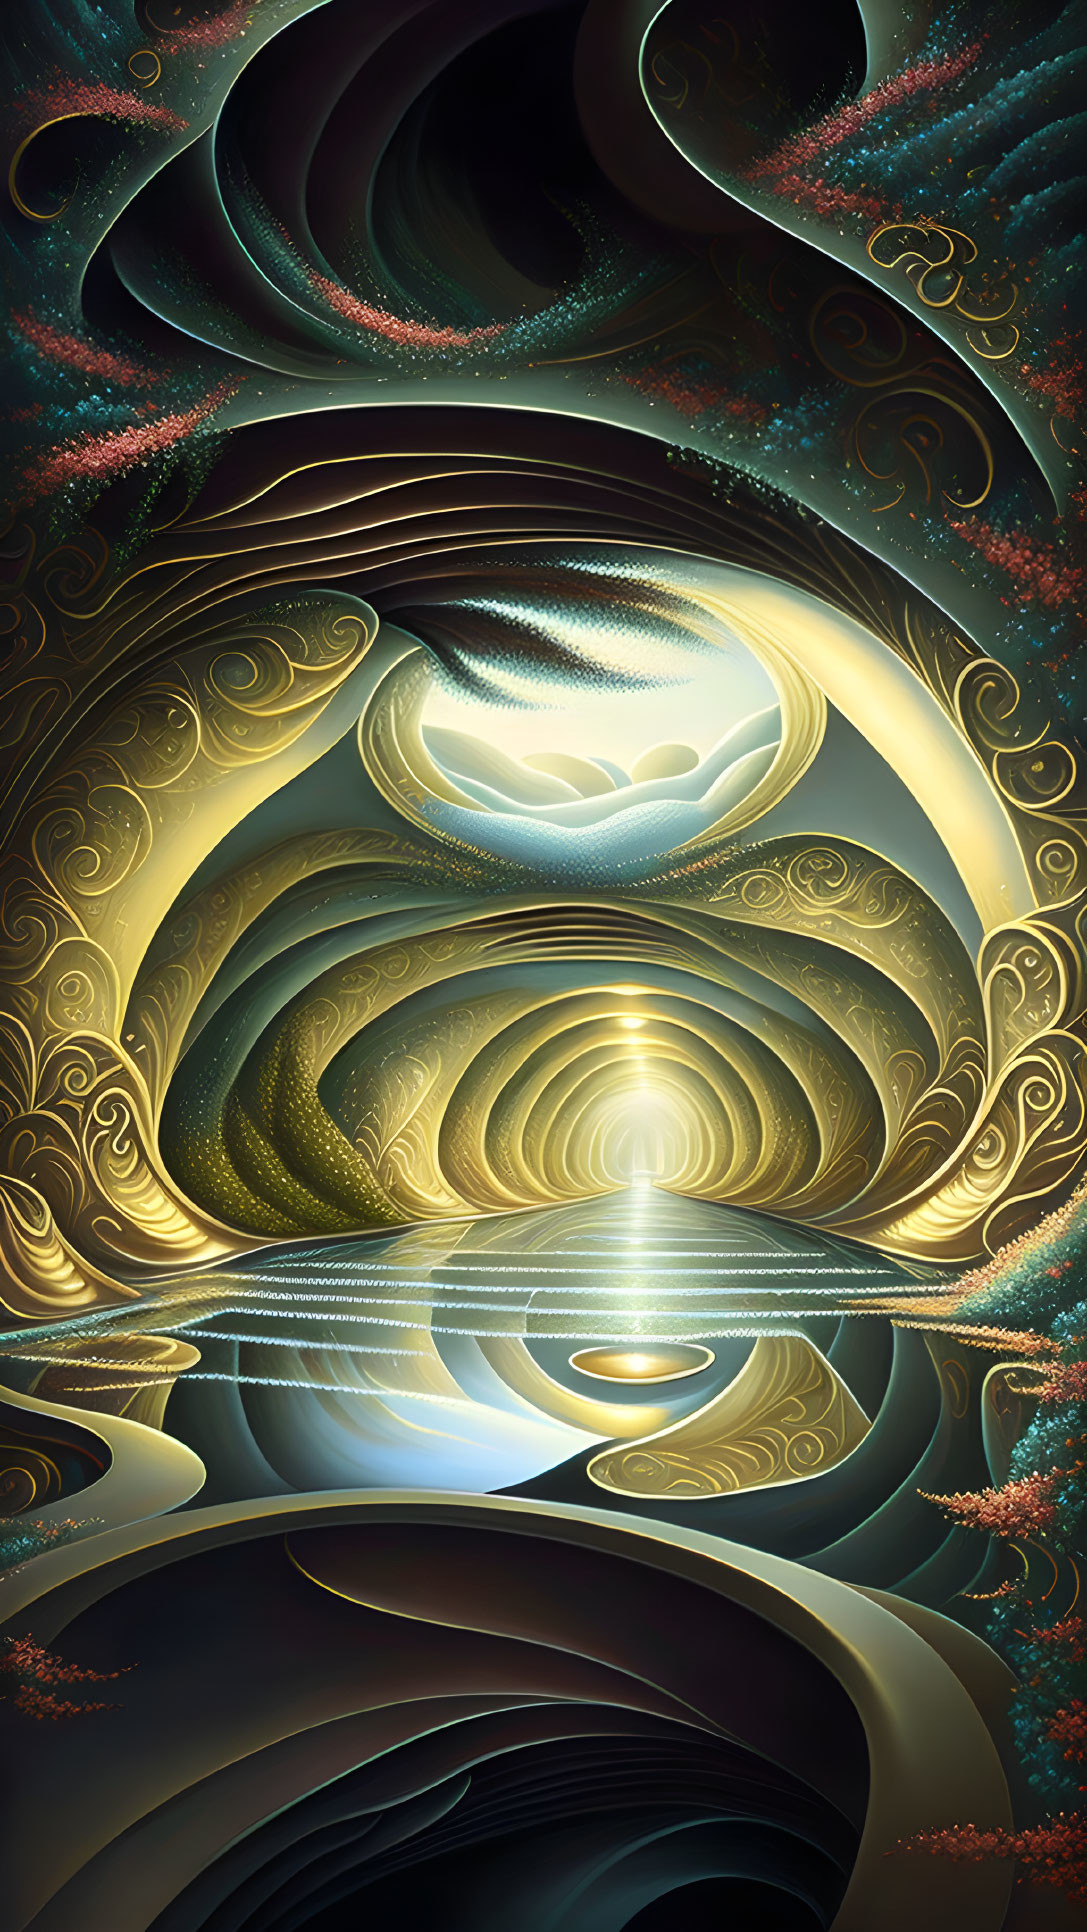 Surreal fractal landscape with swirling patterns in gold, green, and black